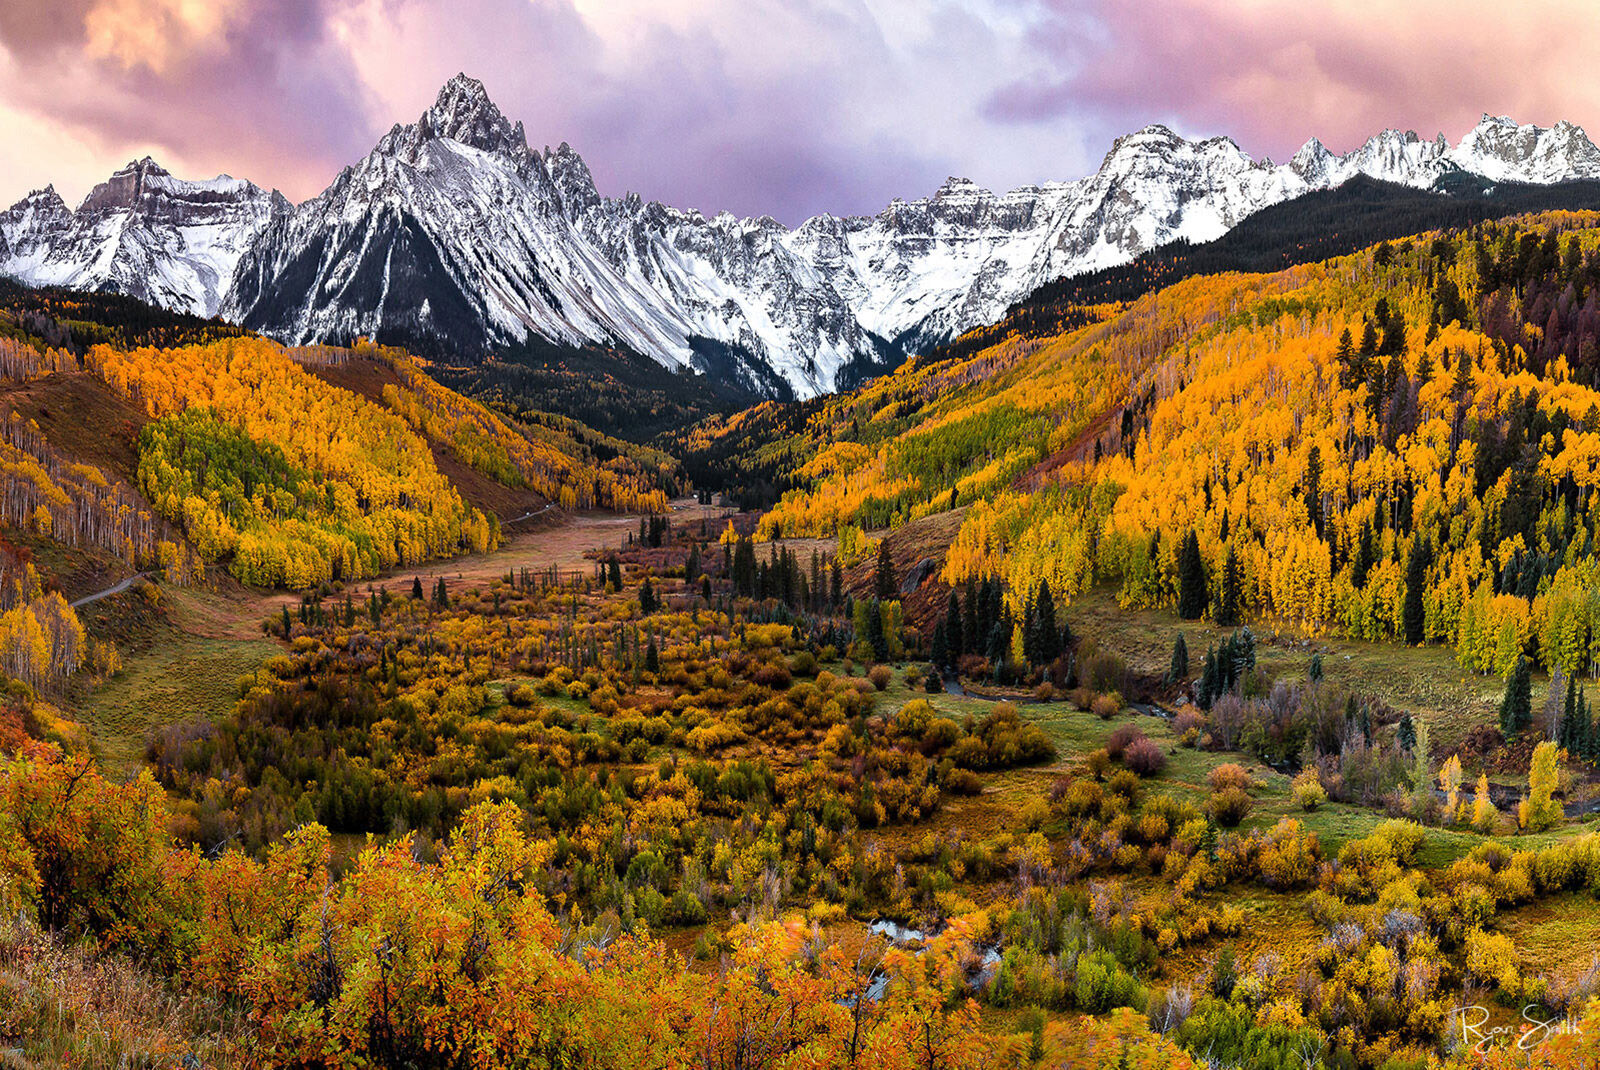 Mountain skyline at sunset with pink clouds and a valley full of gold aspen trees.